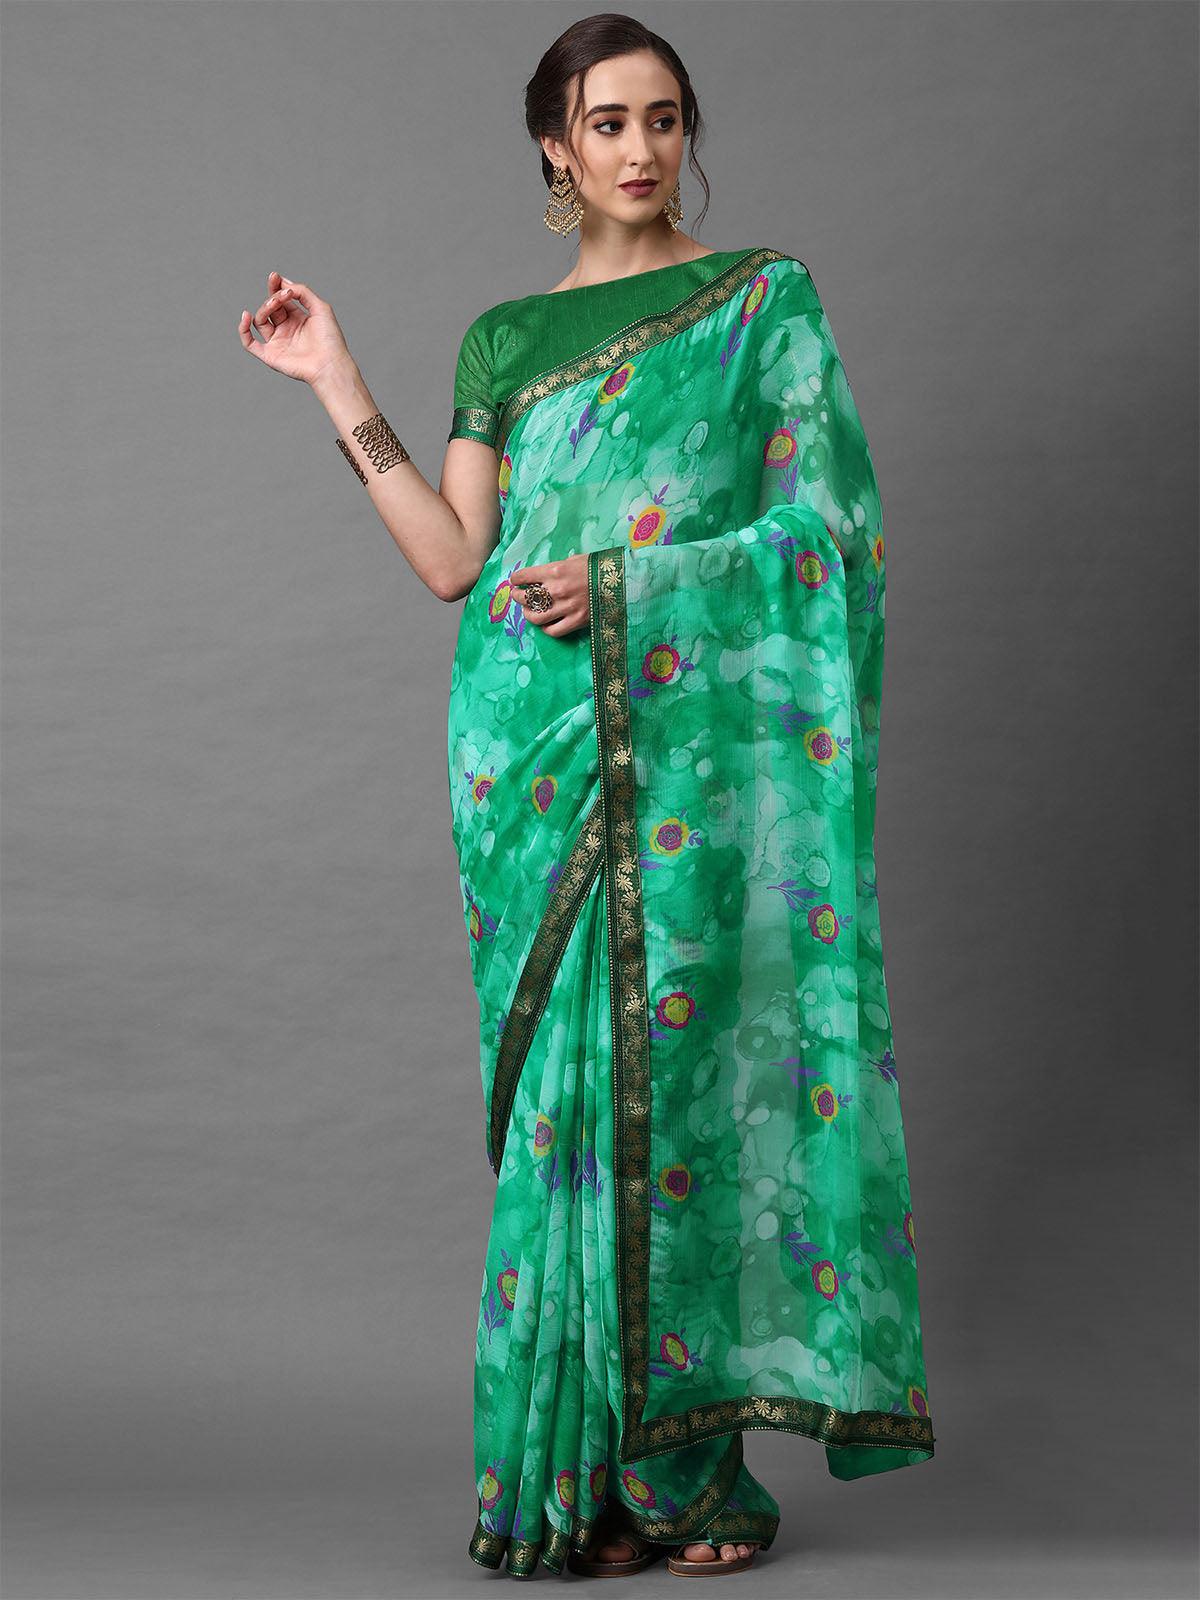 Women's Teal Green Casual Chiffon Printed Saree With Unstitched Blouse - Odette